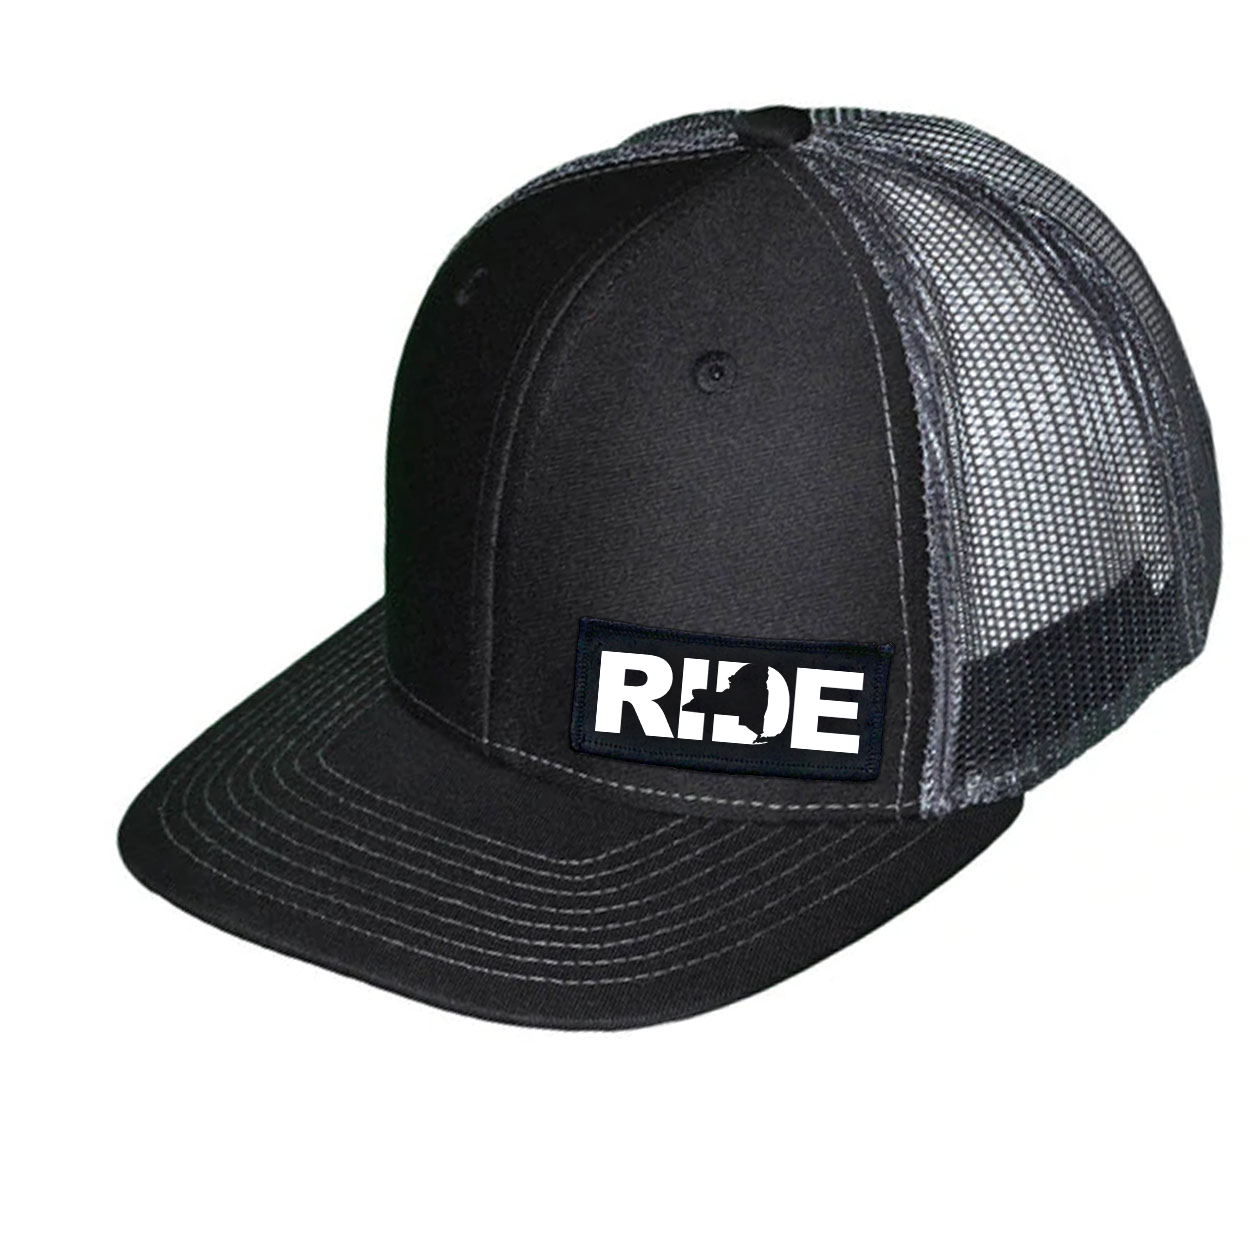 Ride New York Classic Pro Night Out Embroidered Snapback Trucker Hat Black/Gray